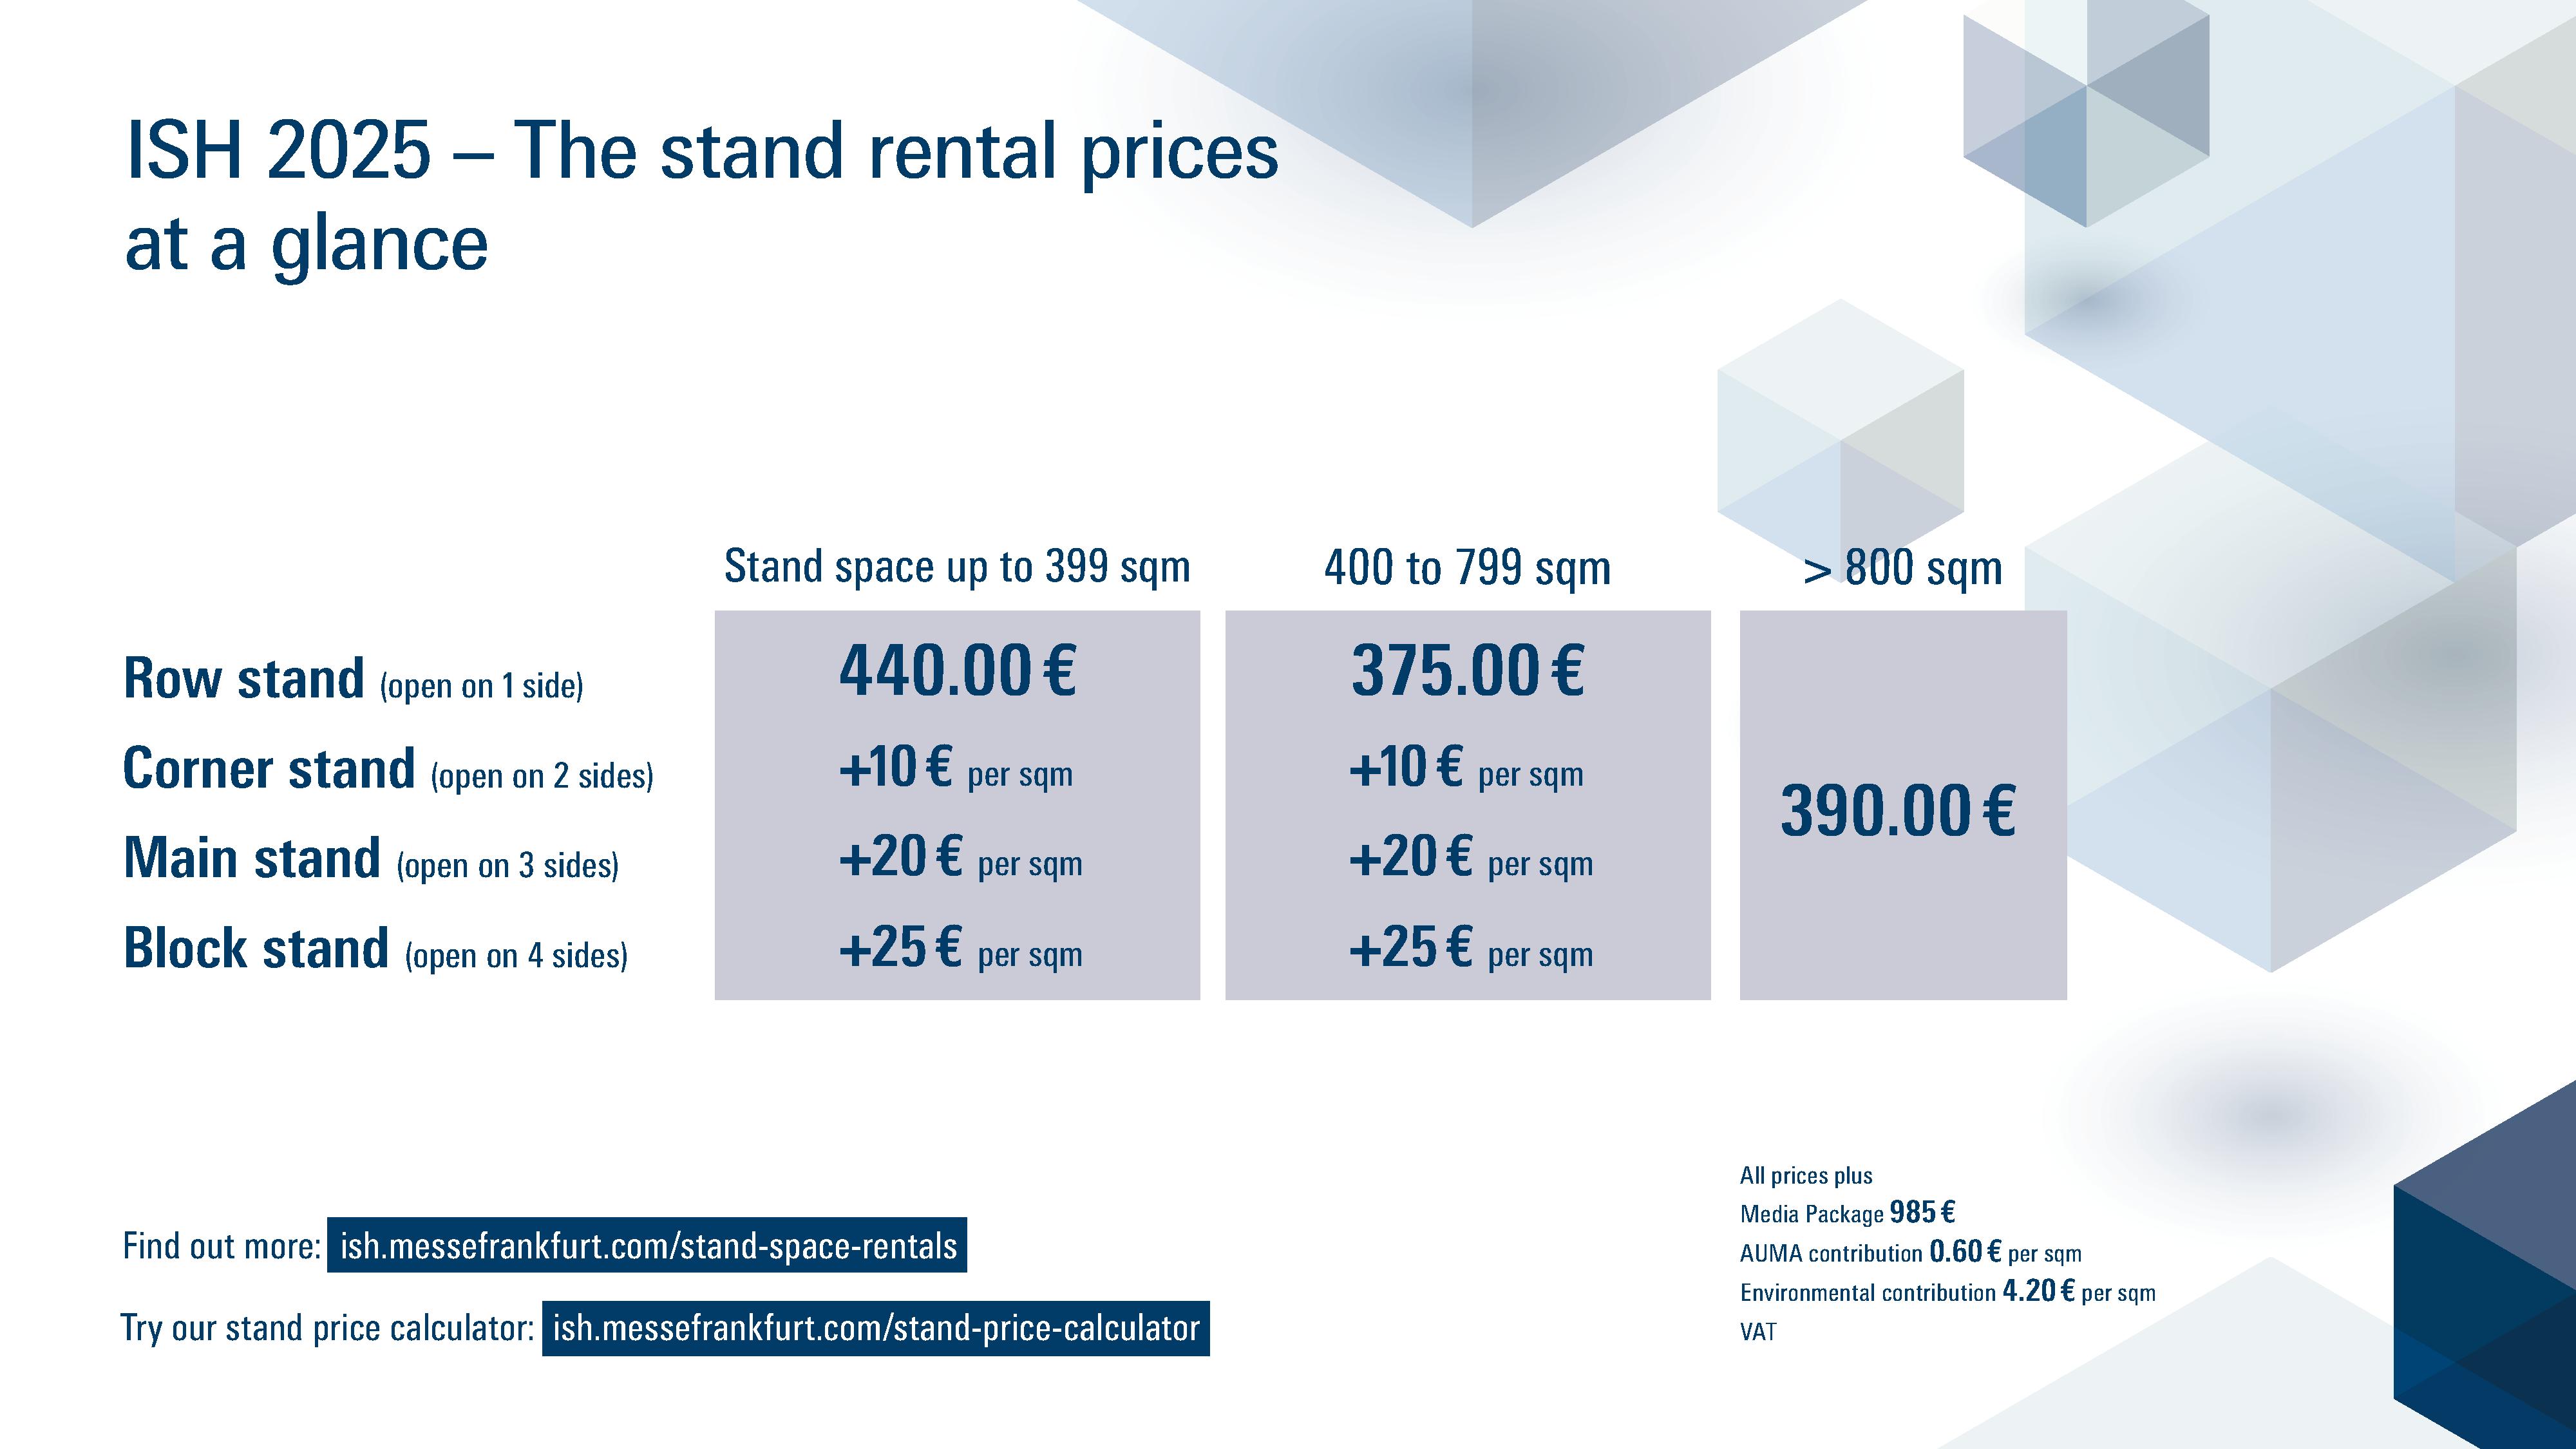 Graphic: The stand rental prices at a glance